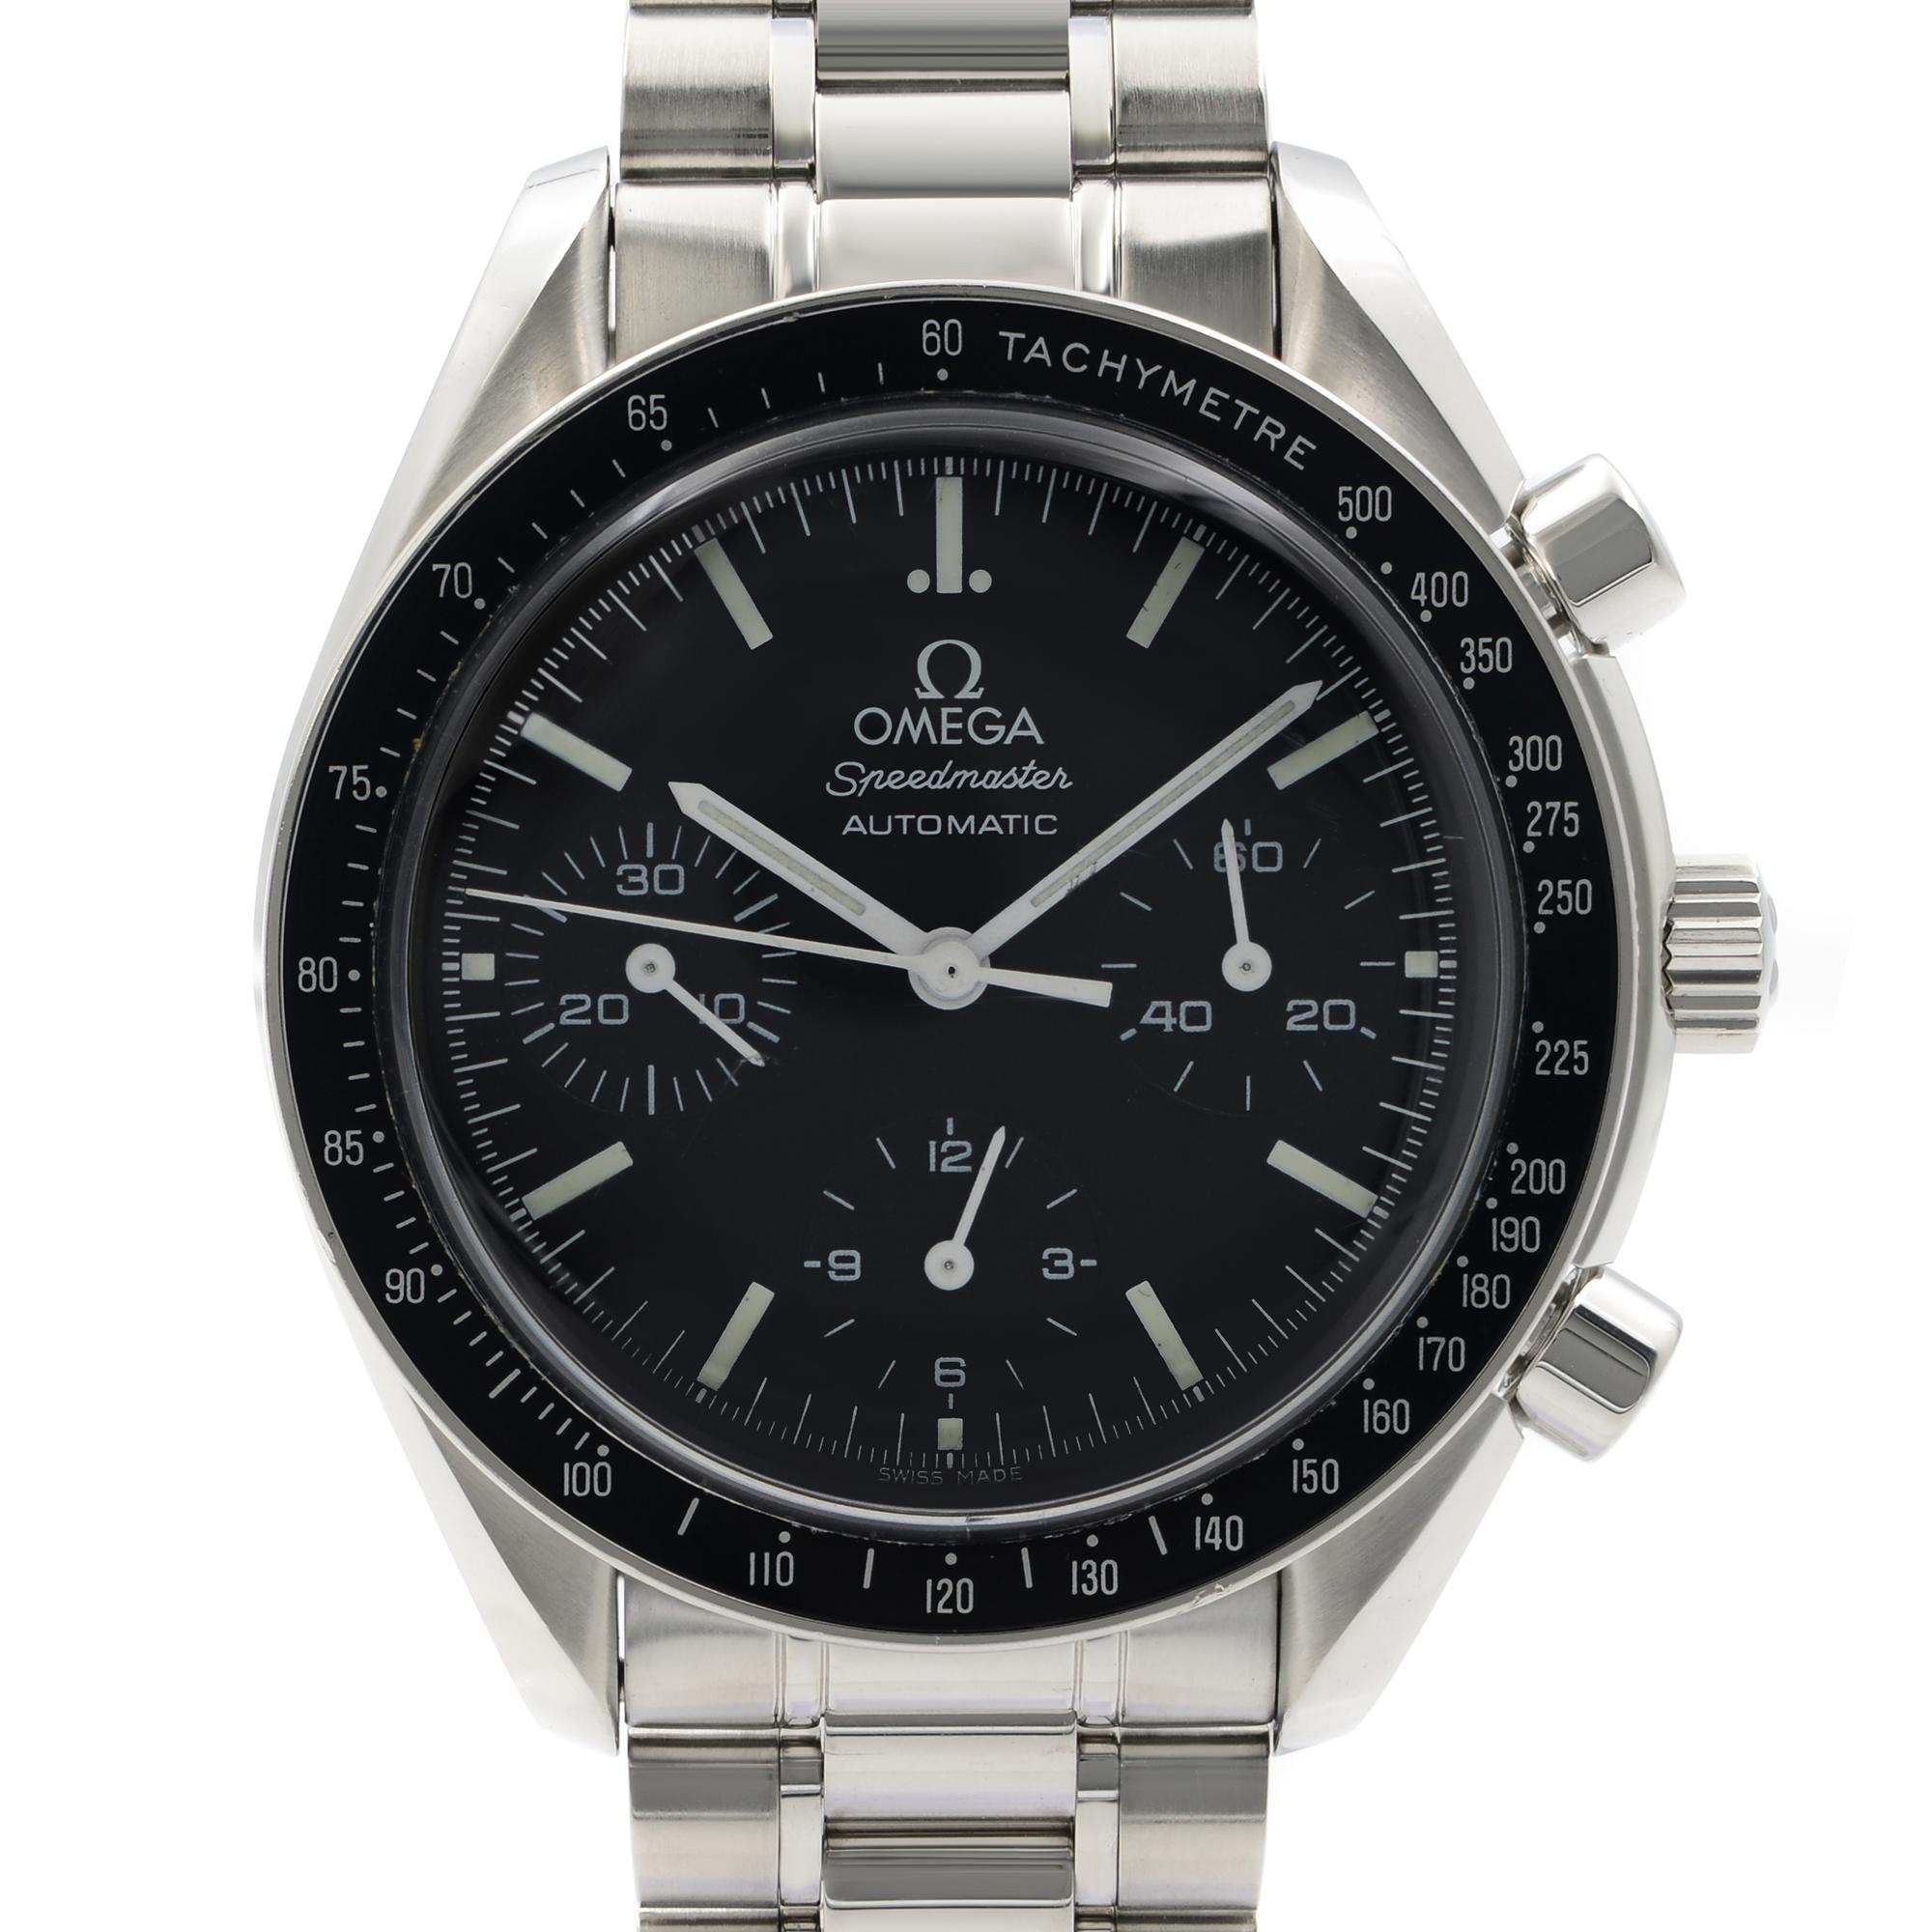 Can have a minor blemish on crystal and hairline blemishes on the bezel. Original Box and Papers are included Covered by a one-year Chronostore warranty.
Details:
Model Number 3539.50.00
Brand OMEGA
Department Men
Style Classic, Sport
Model Omega